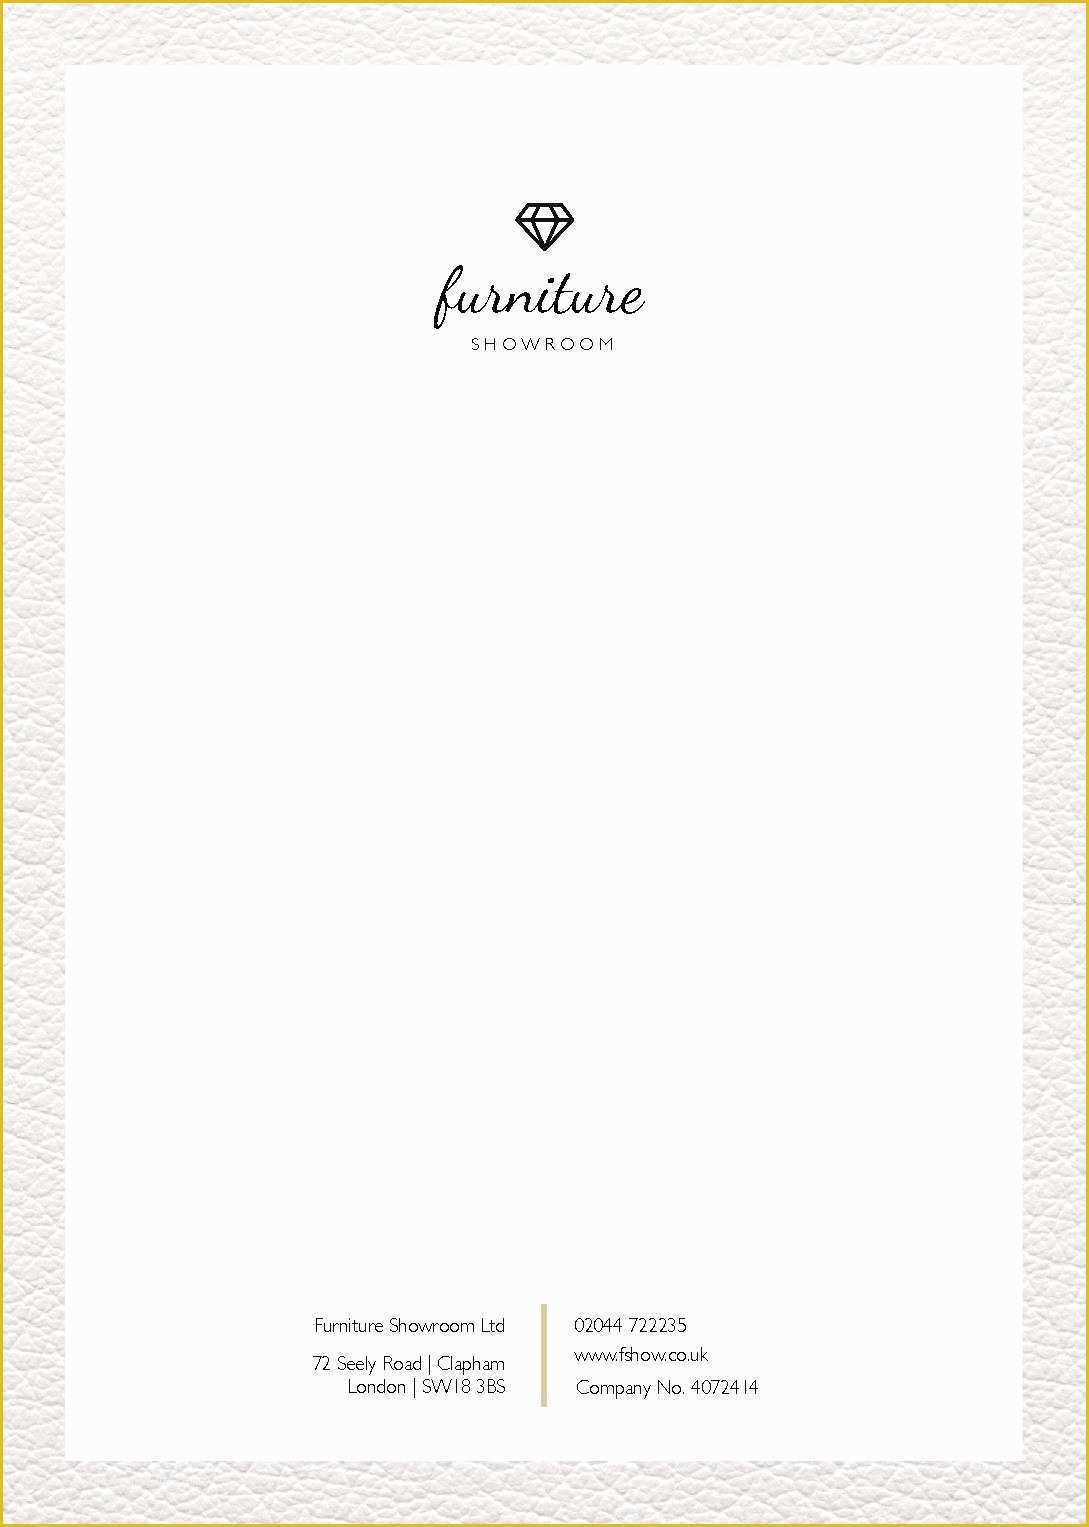 Free Letter Headed Paper Templates Download Of 9 Pany Headed Paper Shawn Weatherly Financial Letter